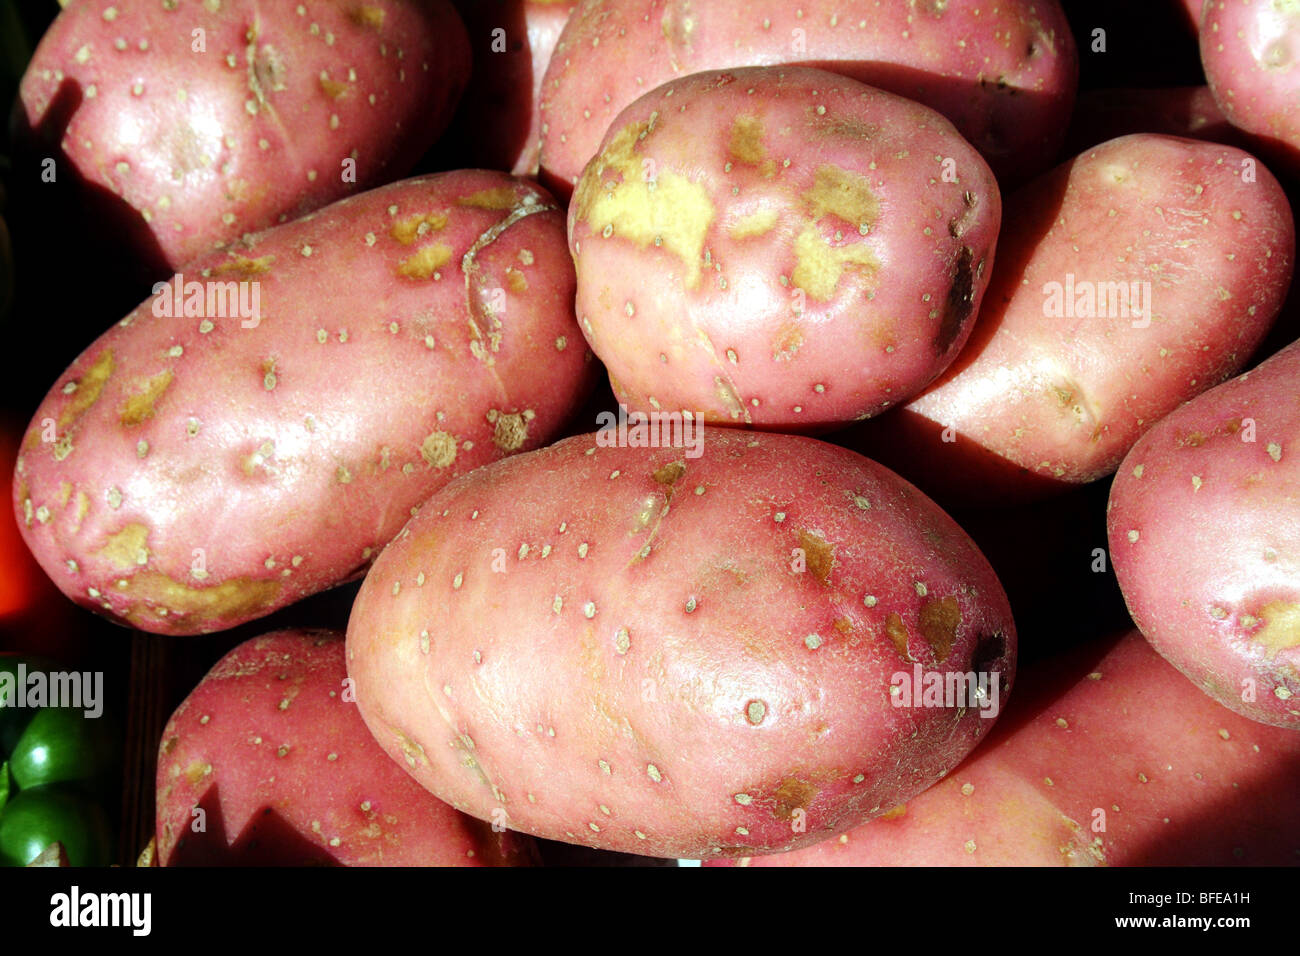 Potatoes Solanum tuberosum of a Pink Variety the tuber source of staple Carbohydrate Family Solanaceae Stock Photo